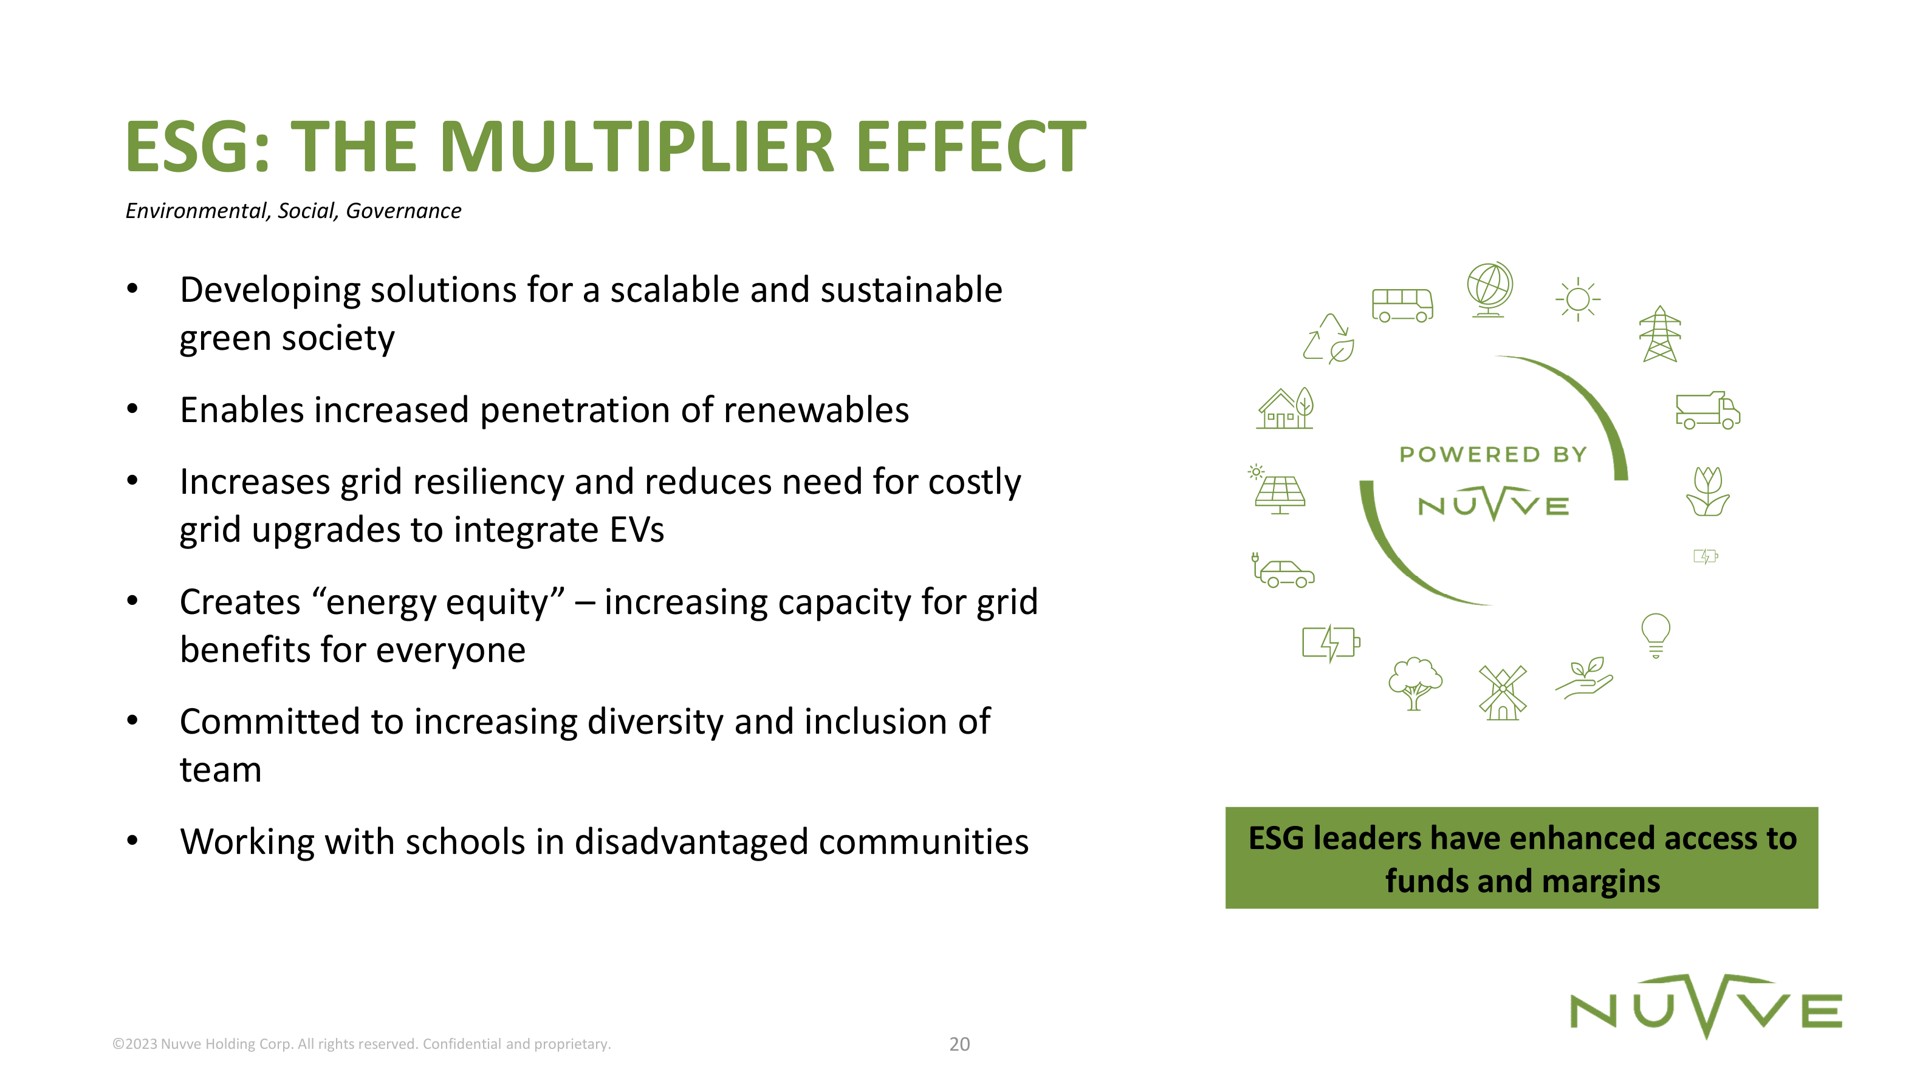 the multiplier effect oes a | Nuvve